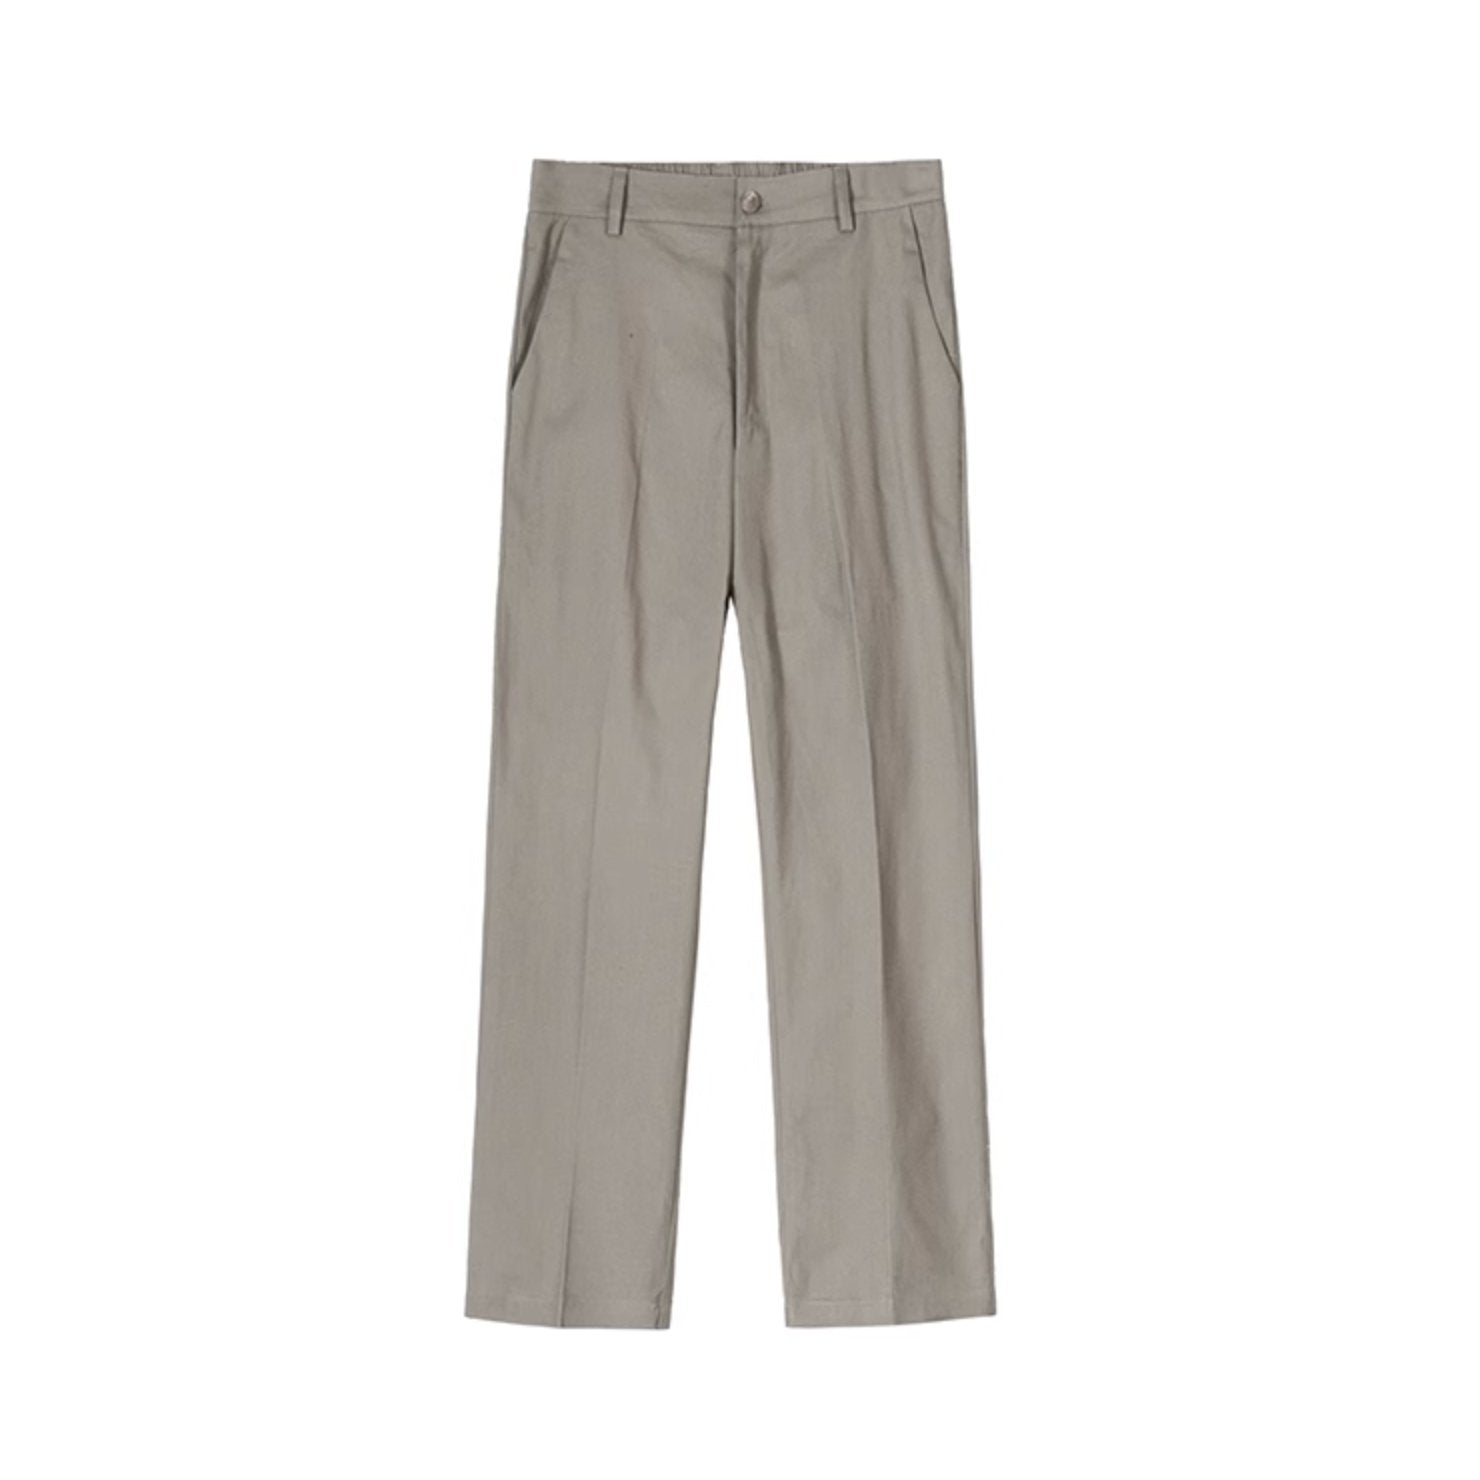 CROPPED ANKLE PANTS - Stockbay